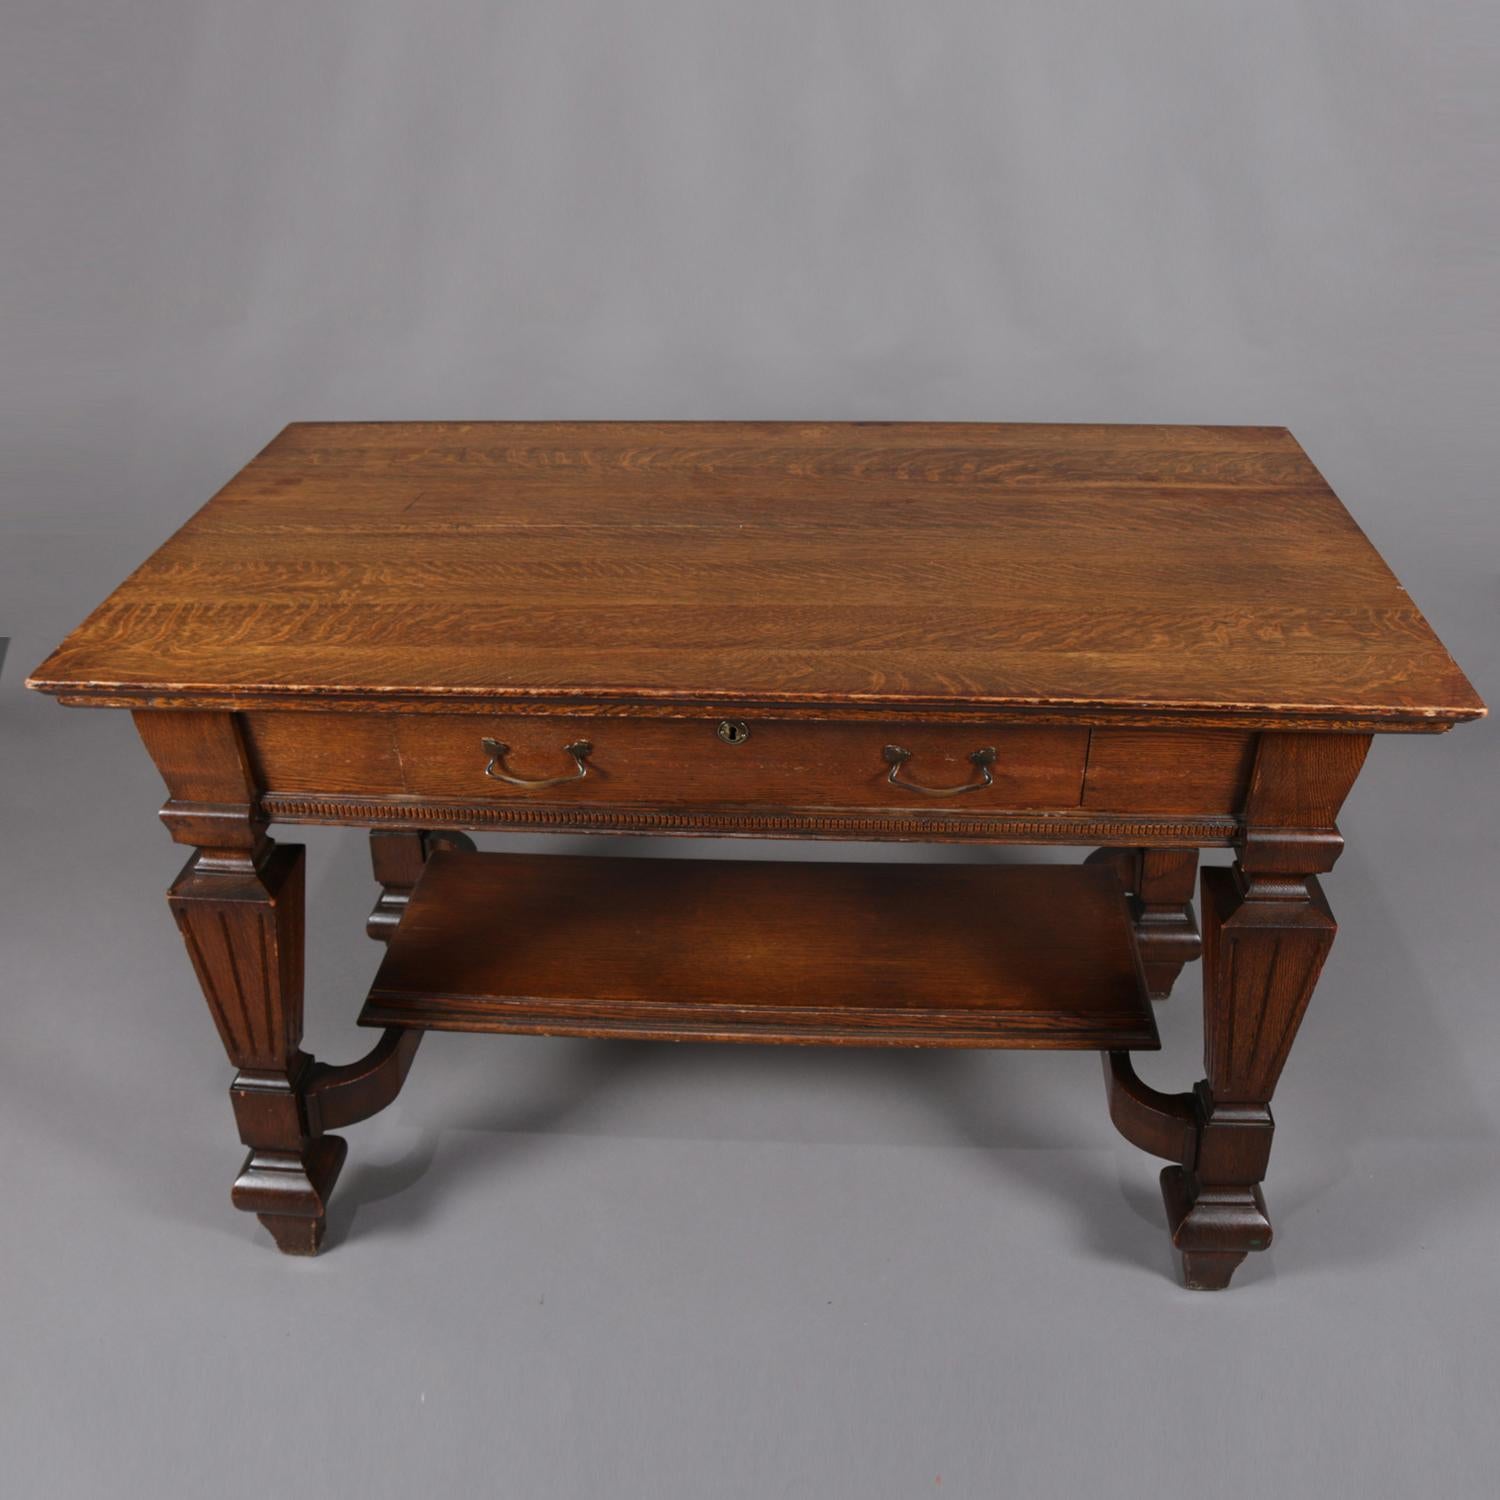 Antique Arts & Crafts R. J. Horner School Oak horner school library table features quarter sawn oak construction with flared cabinet having single drawer above reeded square and flared columnar supports with stretcher having lower shelf, circa